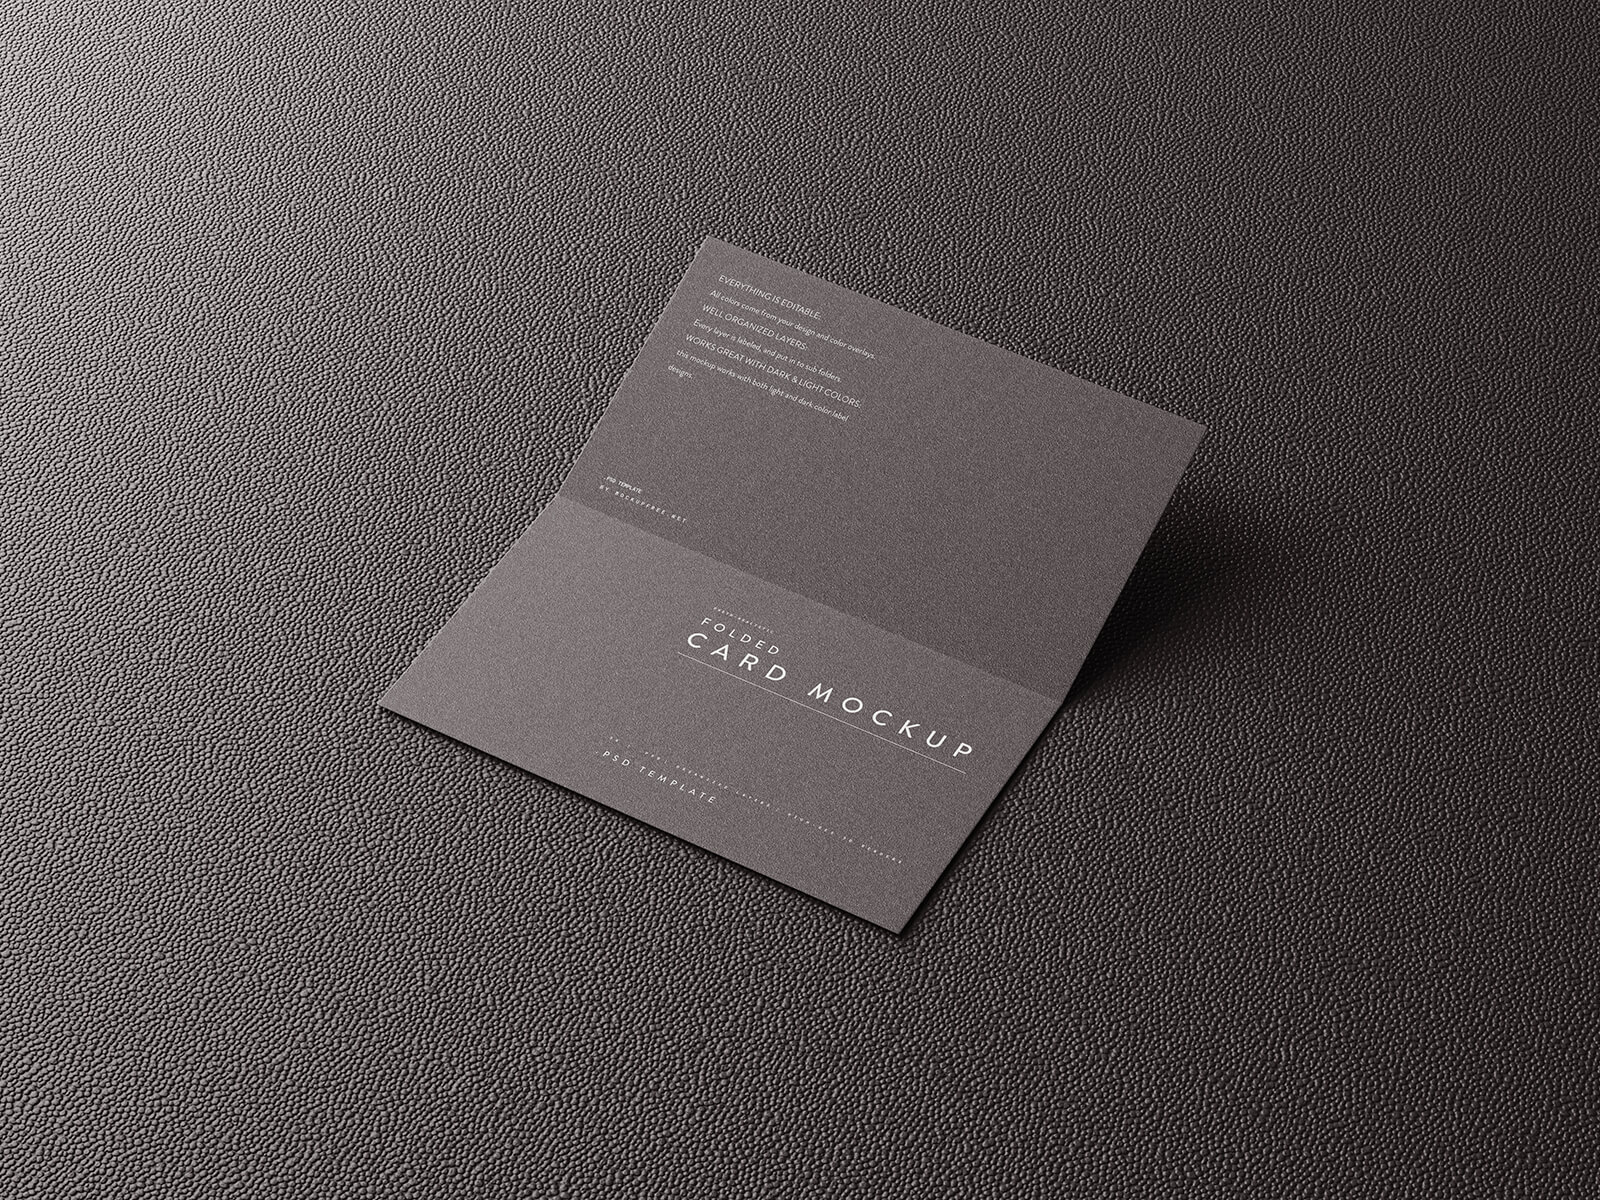 Free Folded Business Card With Notebook Mockup PSD